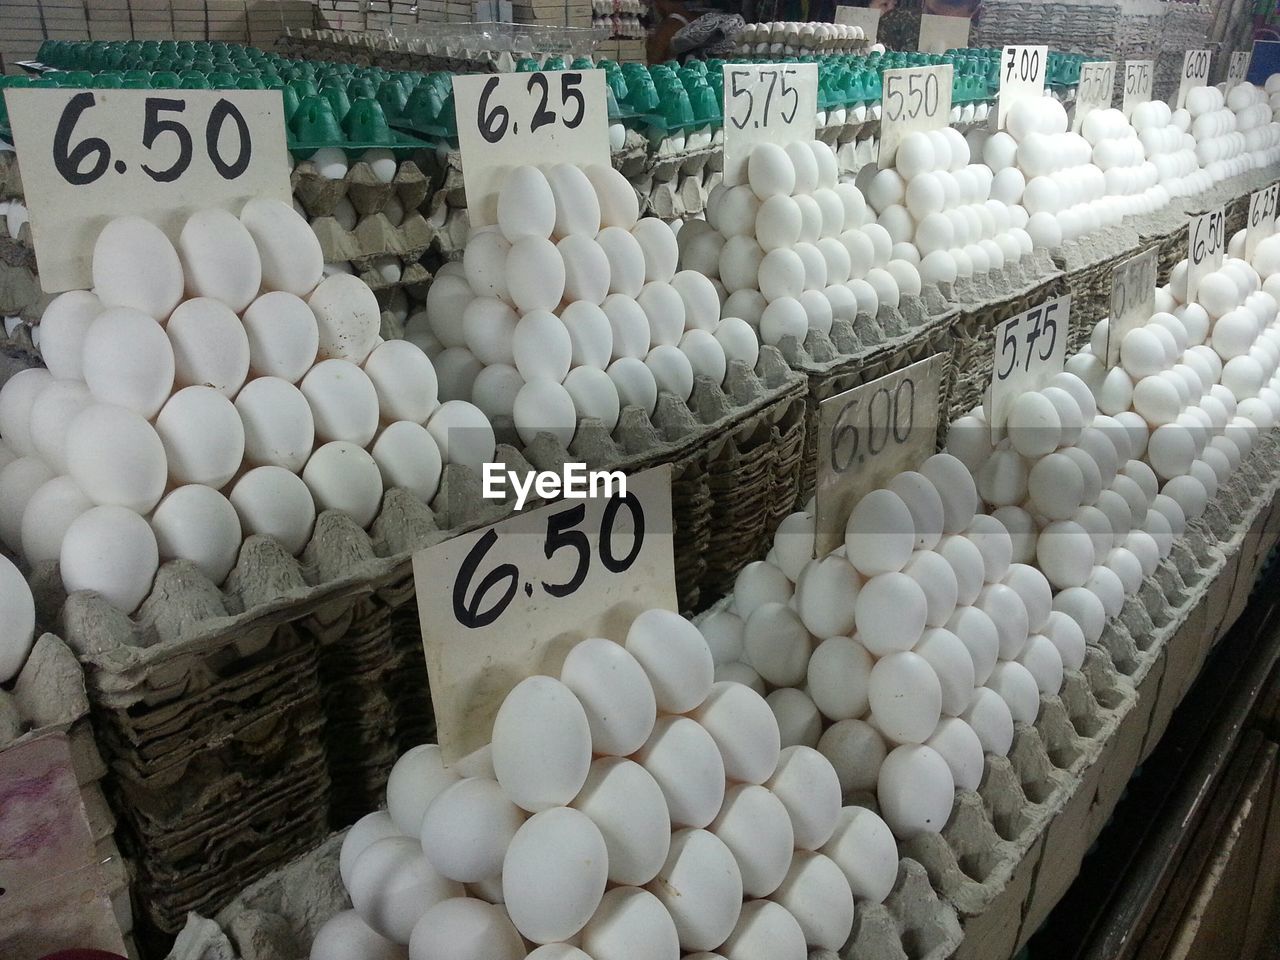 View of eggs at market stall